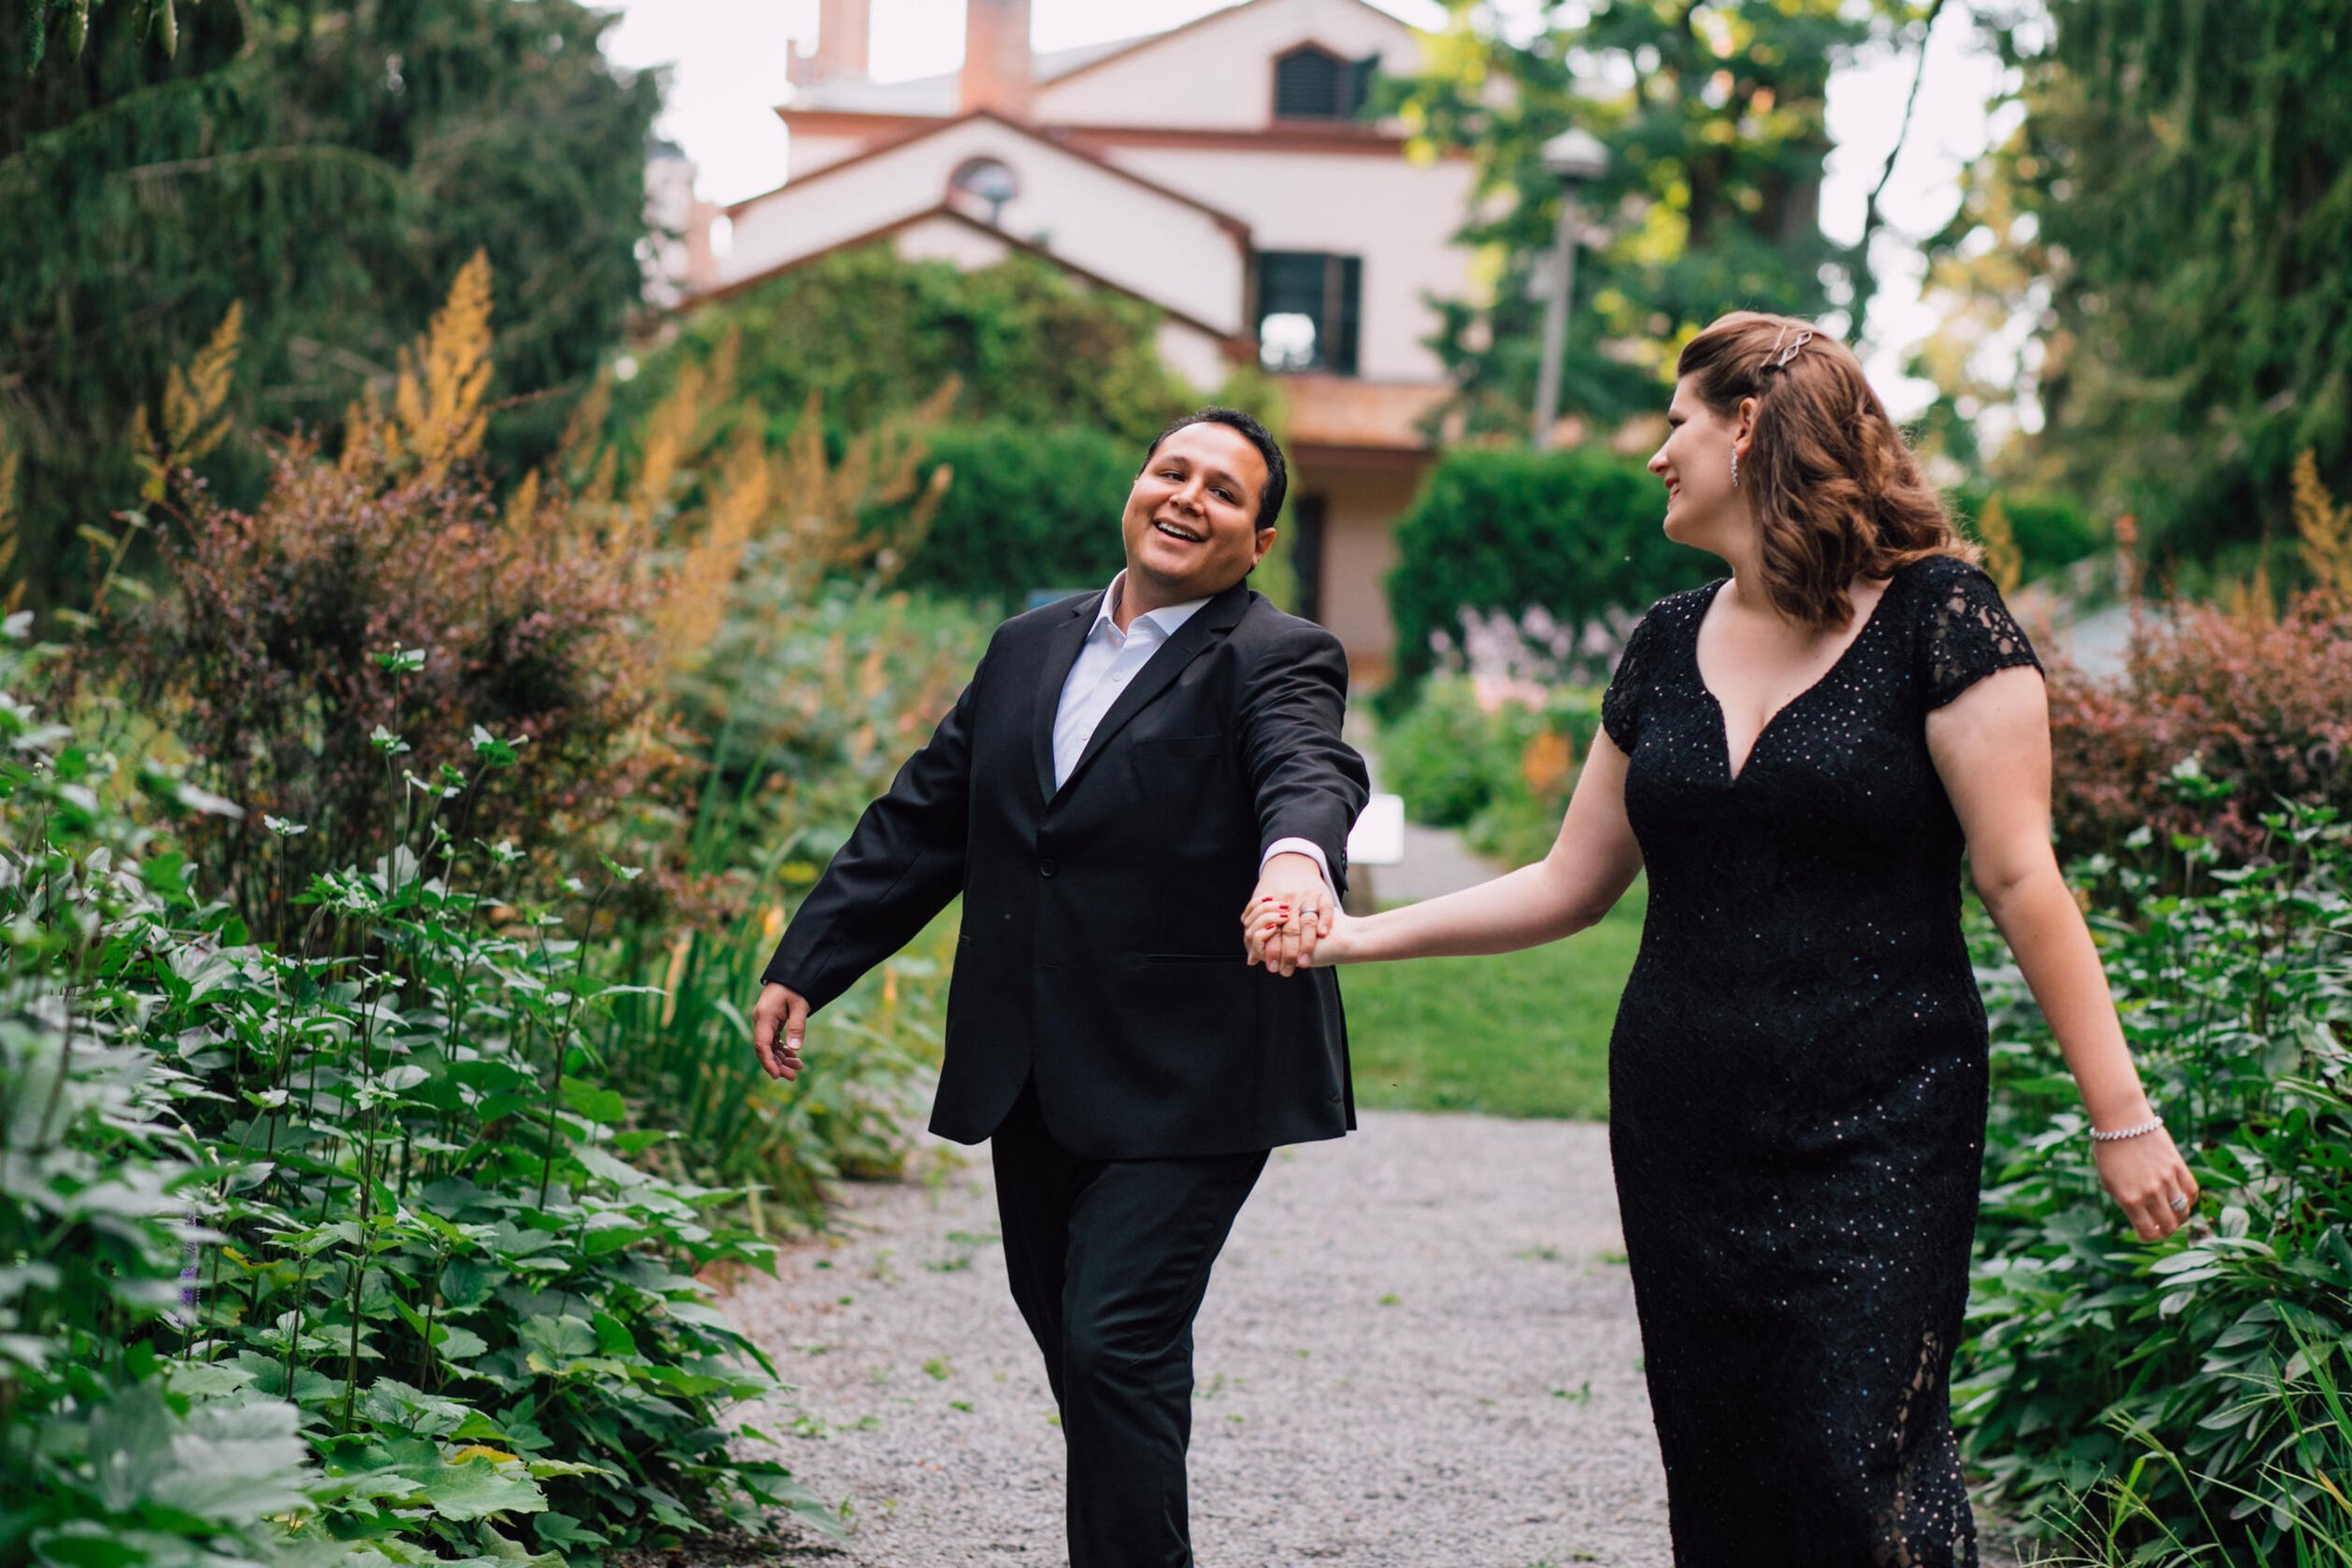  Elizabeth looks back at her husband as they walk hand in hand in hand down a garden path during their anniversary photoshoot 